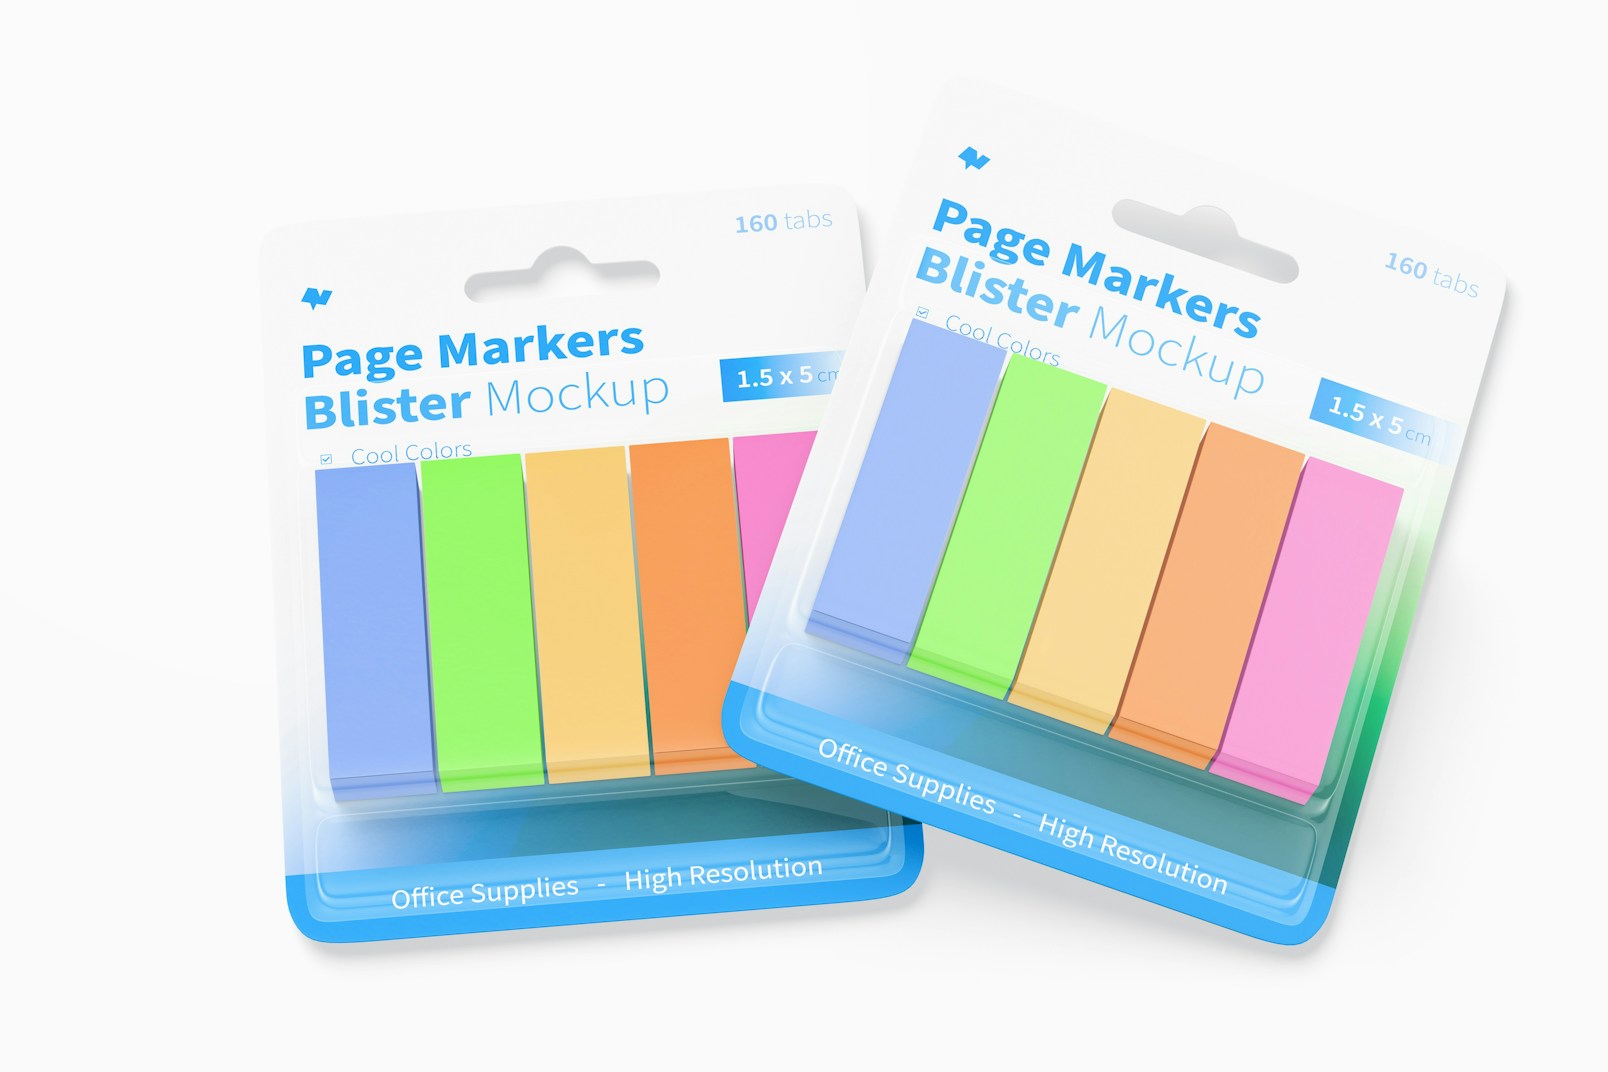 Page Markers Blisters Mockup